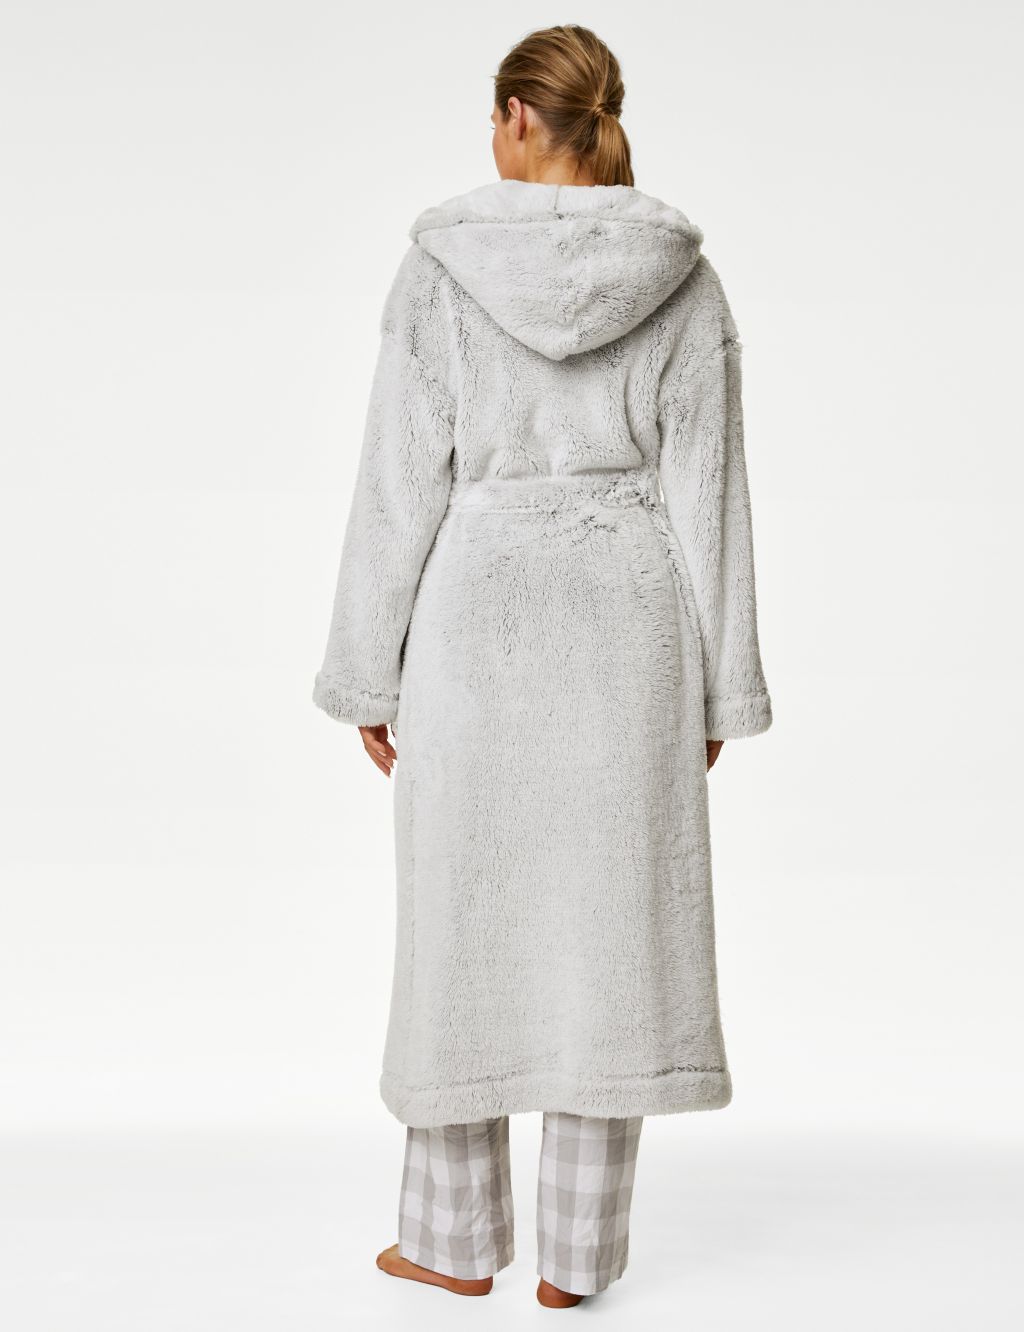 Fleece Hooded Dressing Gown image 5